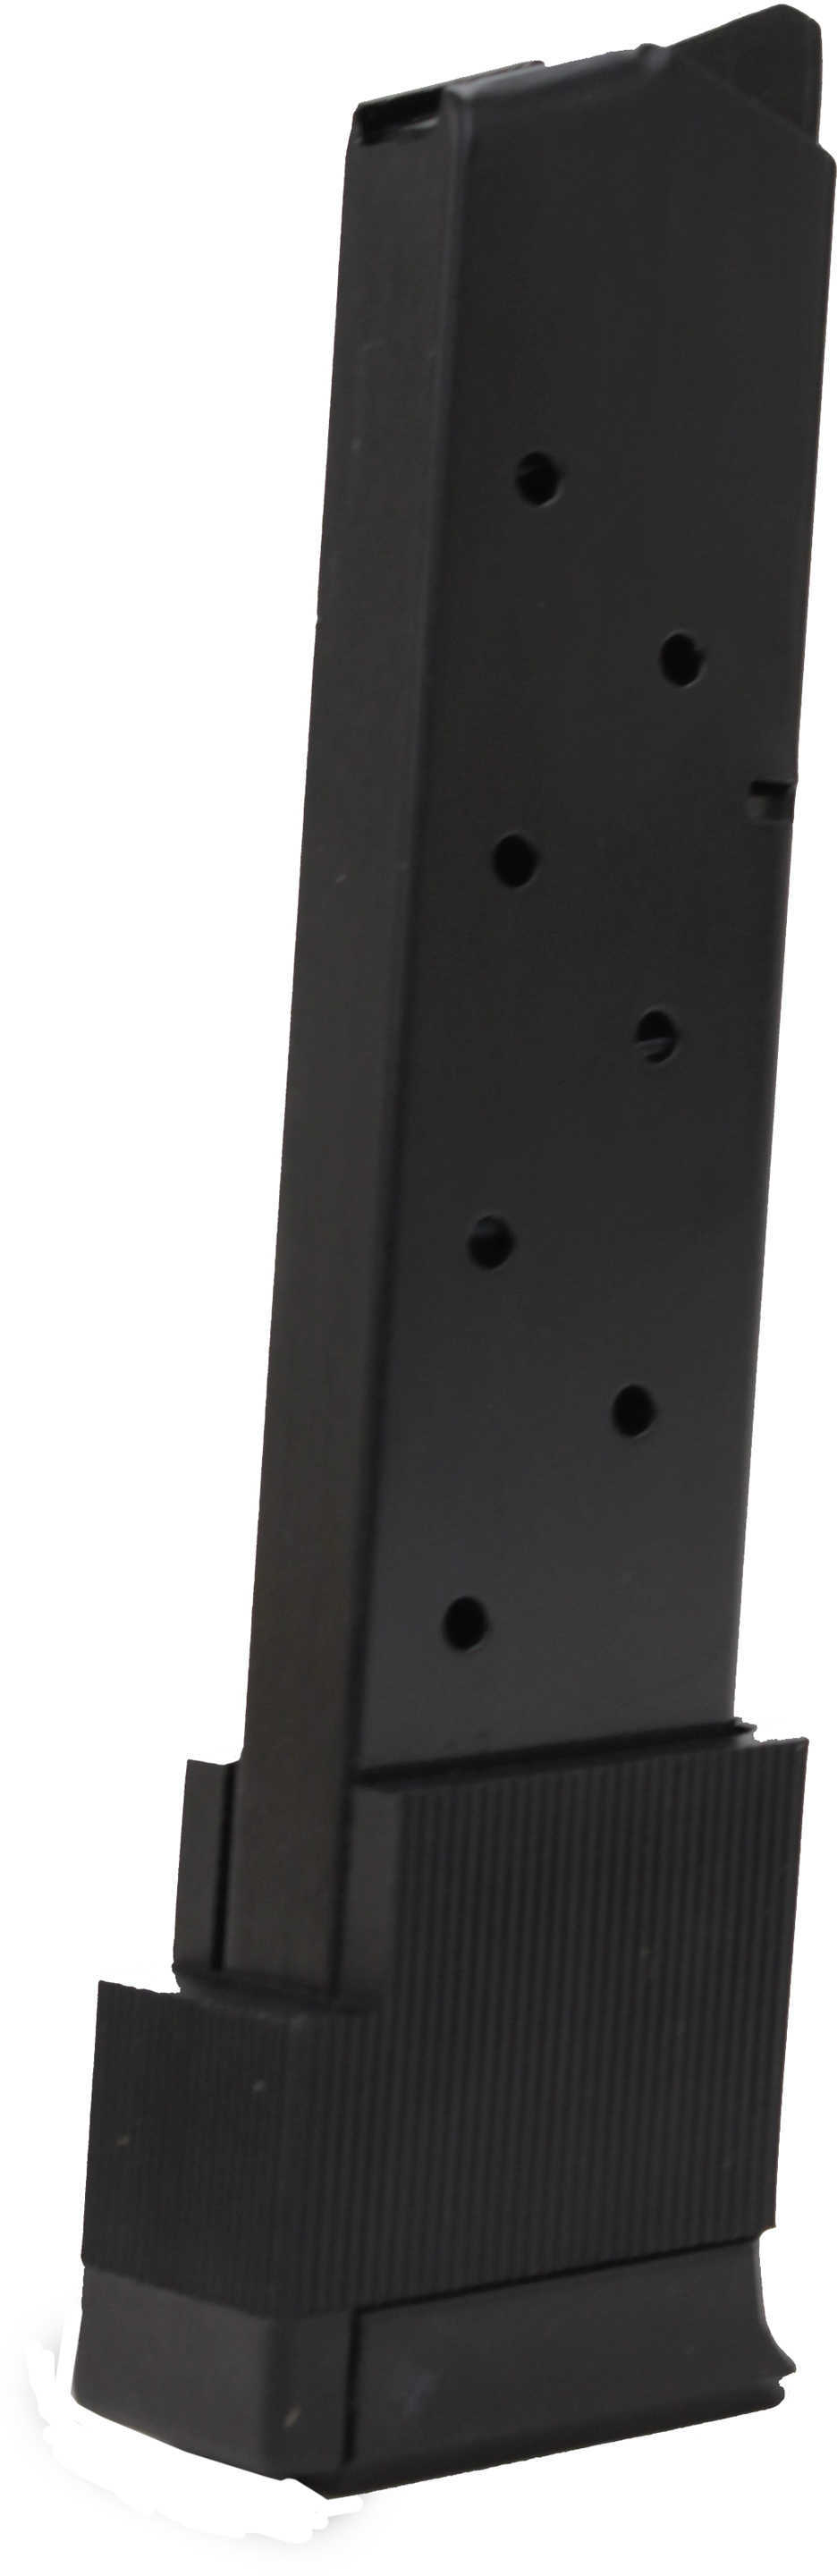 ProMag Ruger P90 Magazine .45 ACP - 10 round Blue Easy loading Rugged high carbon heat-treated body D RUG04